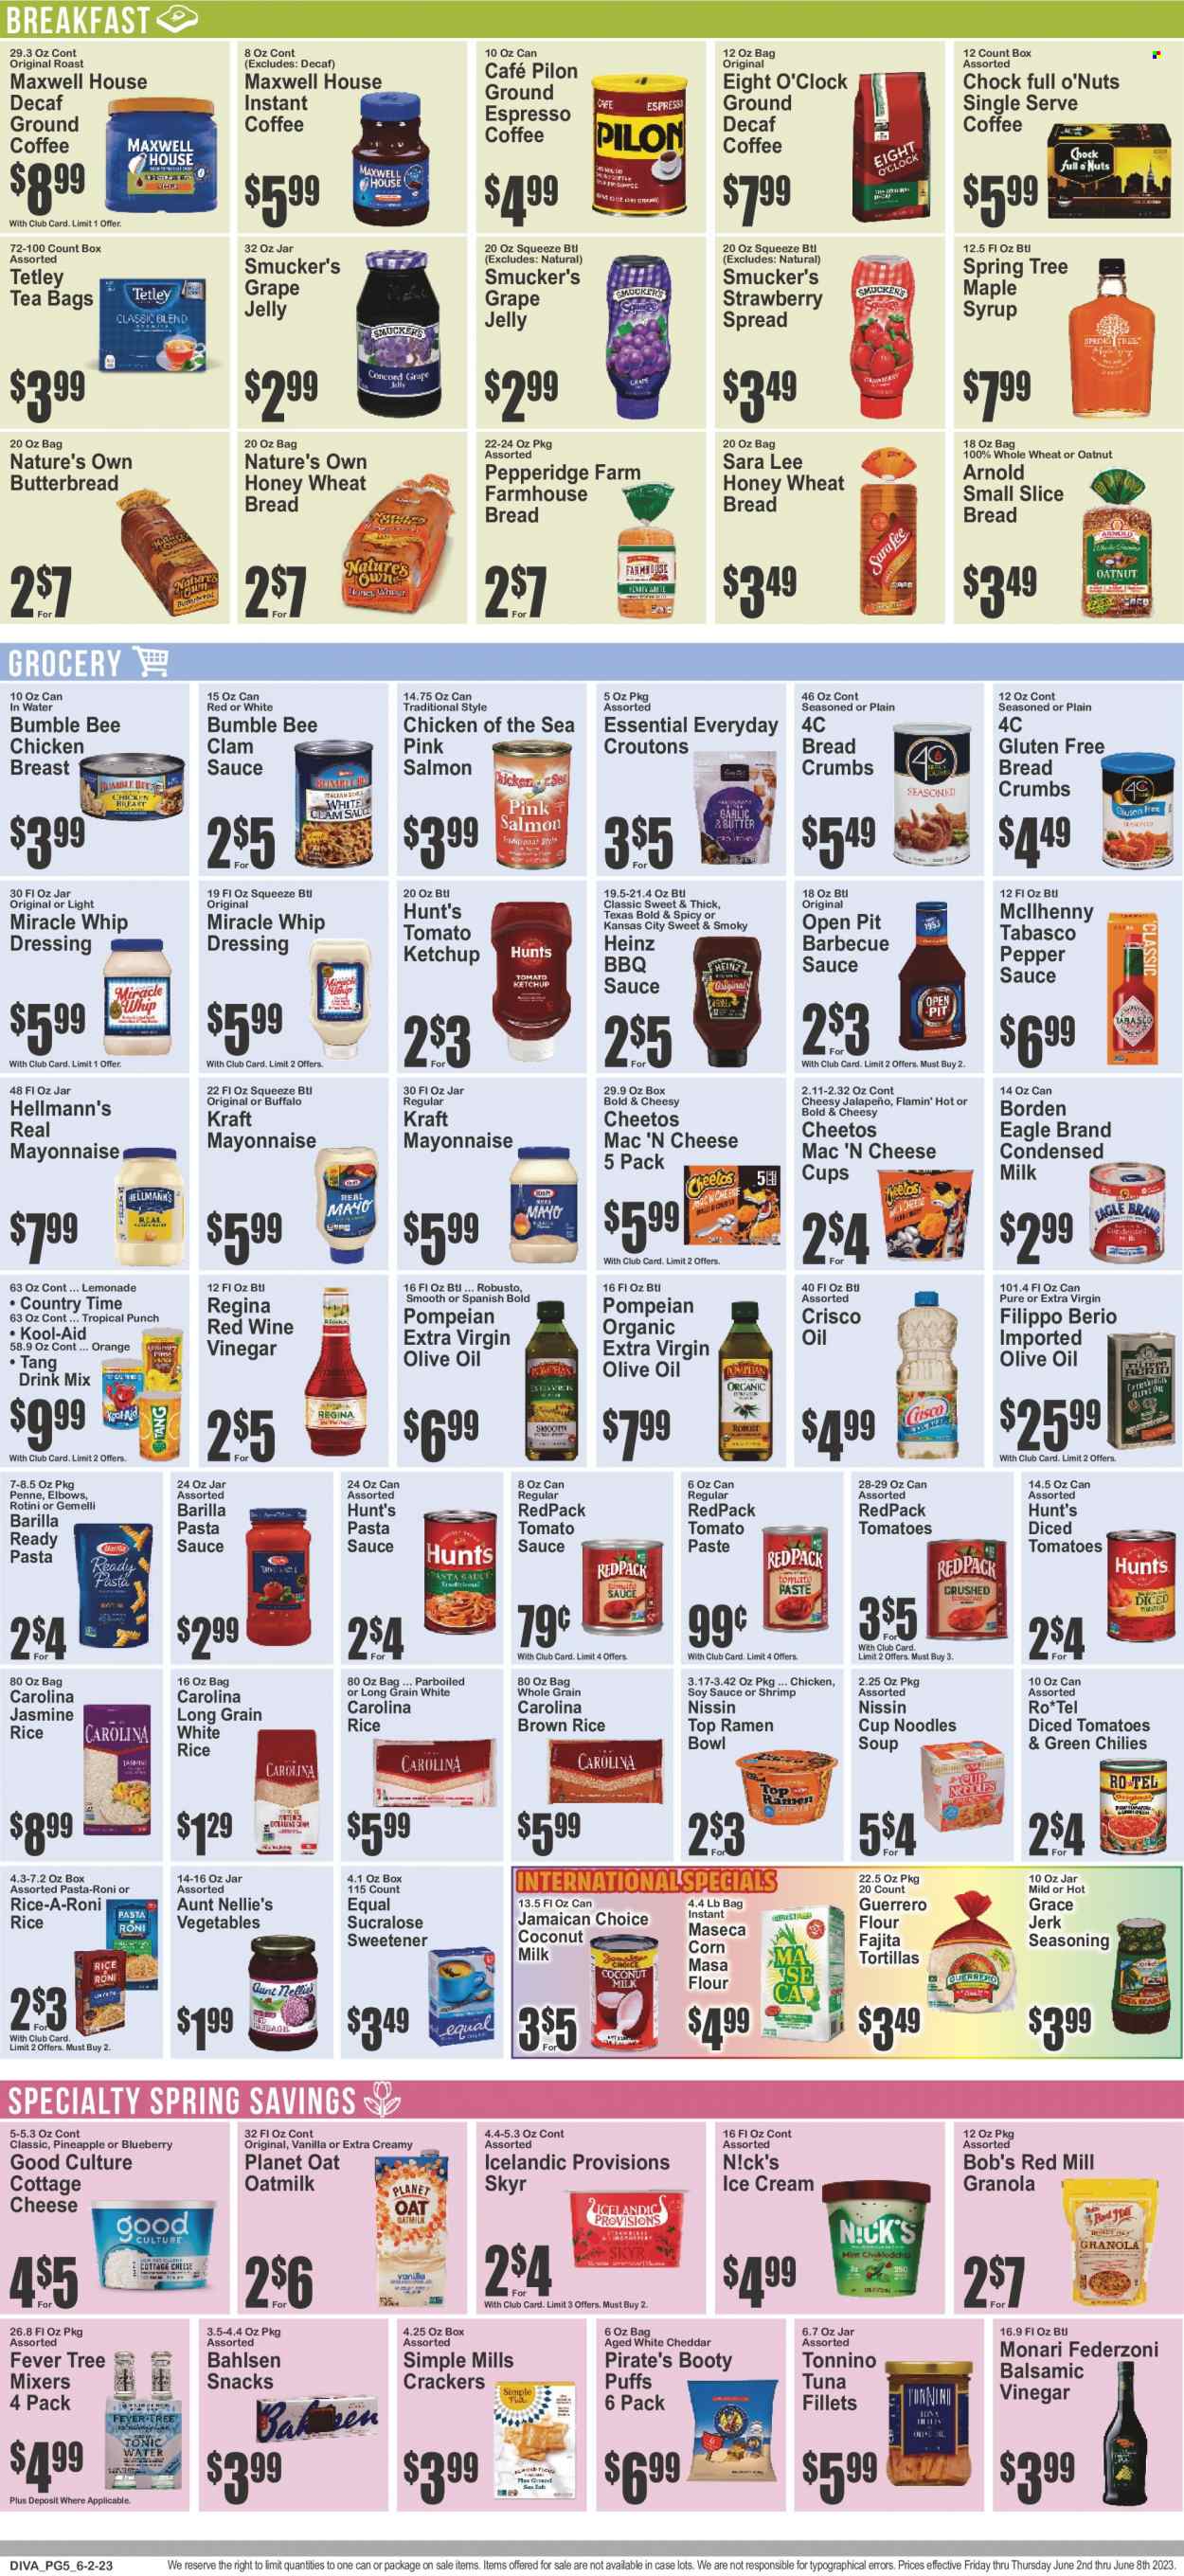 thumbnail - Key Food Flyer - 06/02/2023 - 06/08/2023 - Sales products - wheat bread, Sara Lee, puffs, breadcrumbs, jalapeño, oranges, clams, tuna, shrimps, ramen, pasta sauce, soup, Bumble Bee, noodles cup, Top Ramen, Barilla, fajita, noodles, Kraft®, Nissin, roast, snack, cottage cheese, cheddar, cheese cup, condensed milk, oat milk, mayonnaise, Miracle Whip, Hellmann’s, ice cream, jelly, crackers, Cheetos, salty snack, Crisco, croutons, tabasco, sweetener, coconut milk, tomato paste, tomato sauce, Heinz, tomatoes & green chilies, Chicken of the Sea, diced tomatoes, granola, brown rice, rice, jasmine rice, white rice, penne, pepper, spice, BBQ sauce, soy sauce, ketchup, dressing, balsamic vinegar, extra virgin olive oil, vinegar, wine vinegar, olive oil, oil, grape jelly, maple syrup, syrup, lemonade, Country Time, fruit punch, water, powder drink, Maxwell House, tea bags, instant coffee, ground coffee, Eight O'Clock, alcohol, bowl, Nature's Own. Page 6.